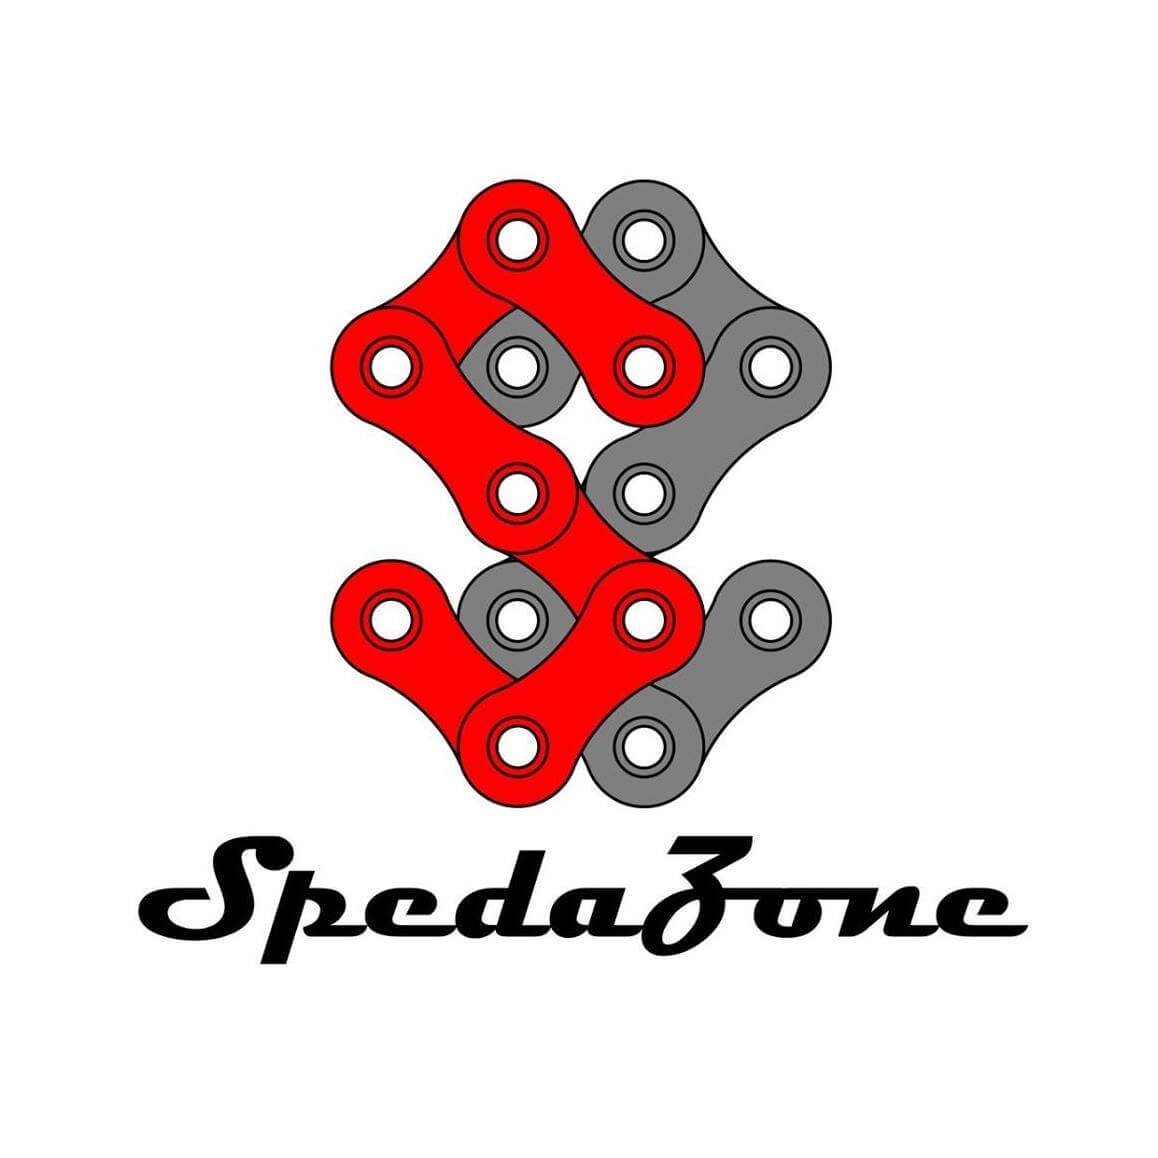 Spedazone Bicycle Shop